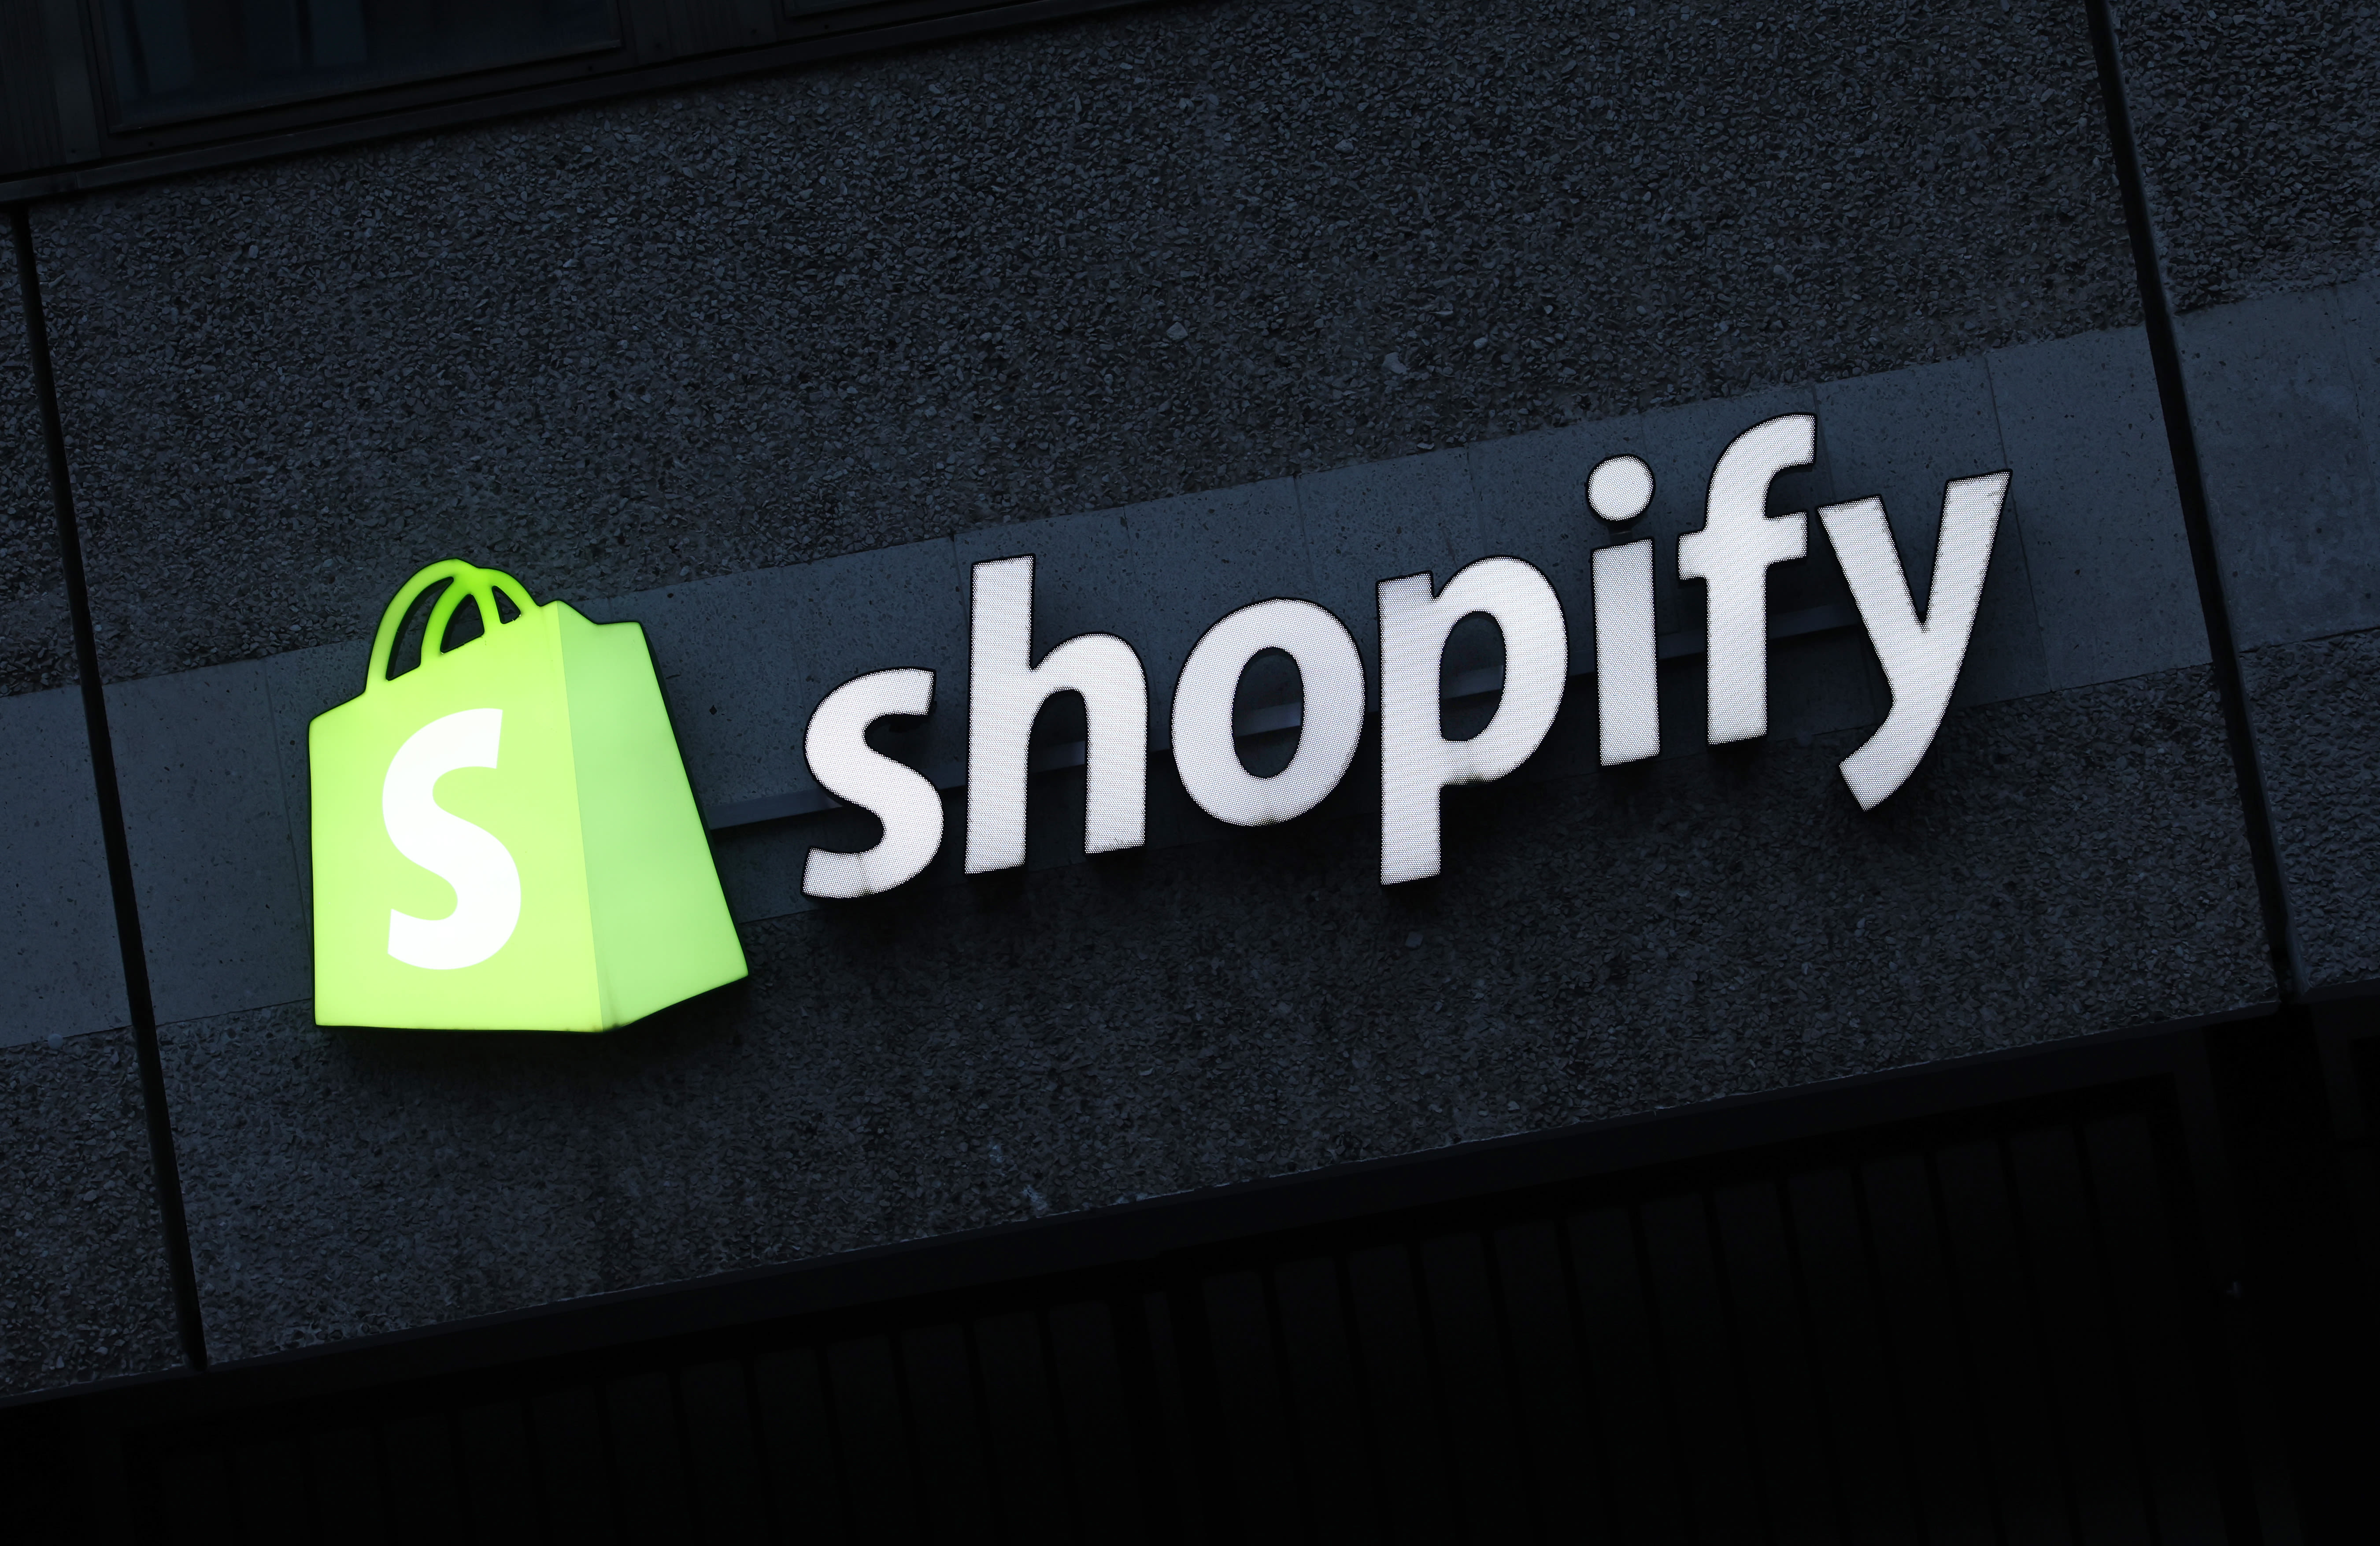 Shopify stock tumbles 20% after forecasting slower Q2 sales growth